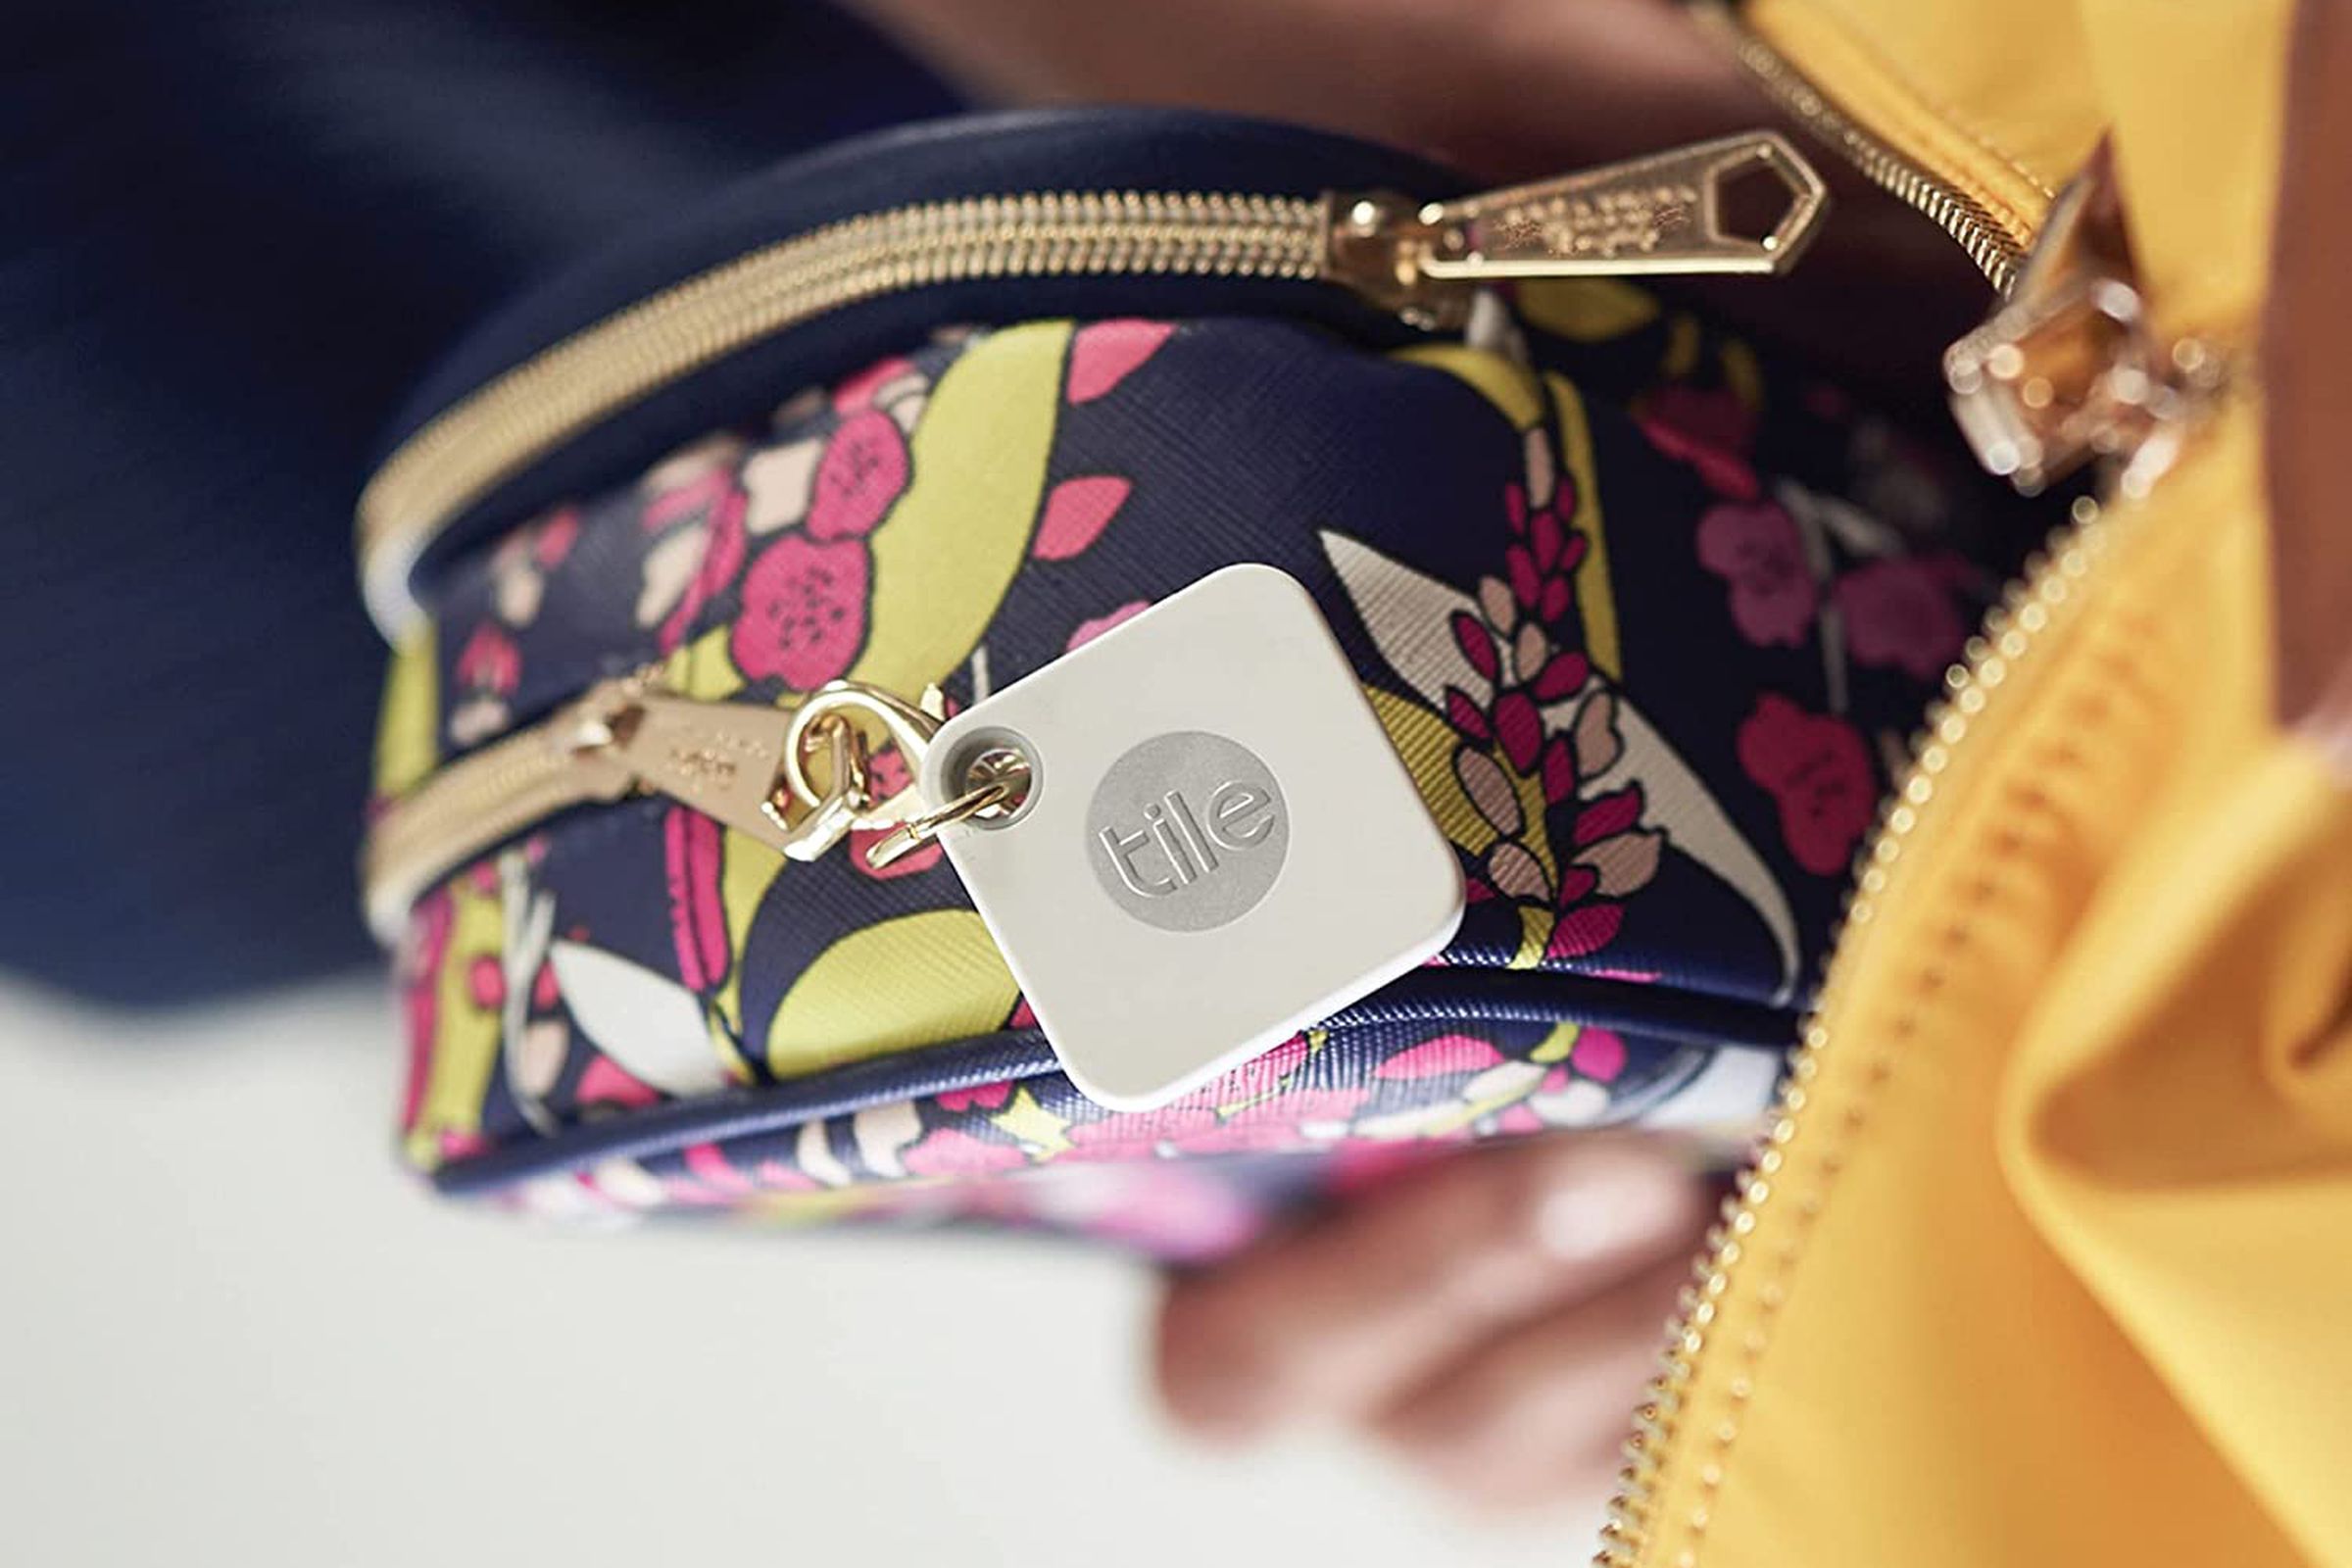 The Tile Mate features excellent Bluetooth range and, unlike AirTags, Android compatibility.